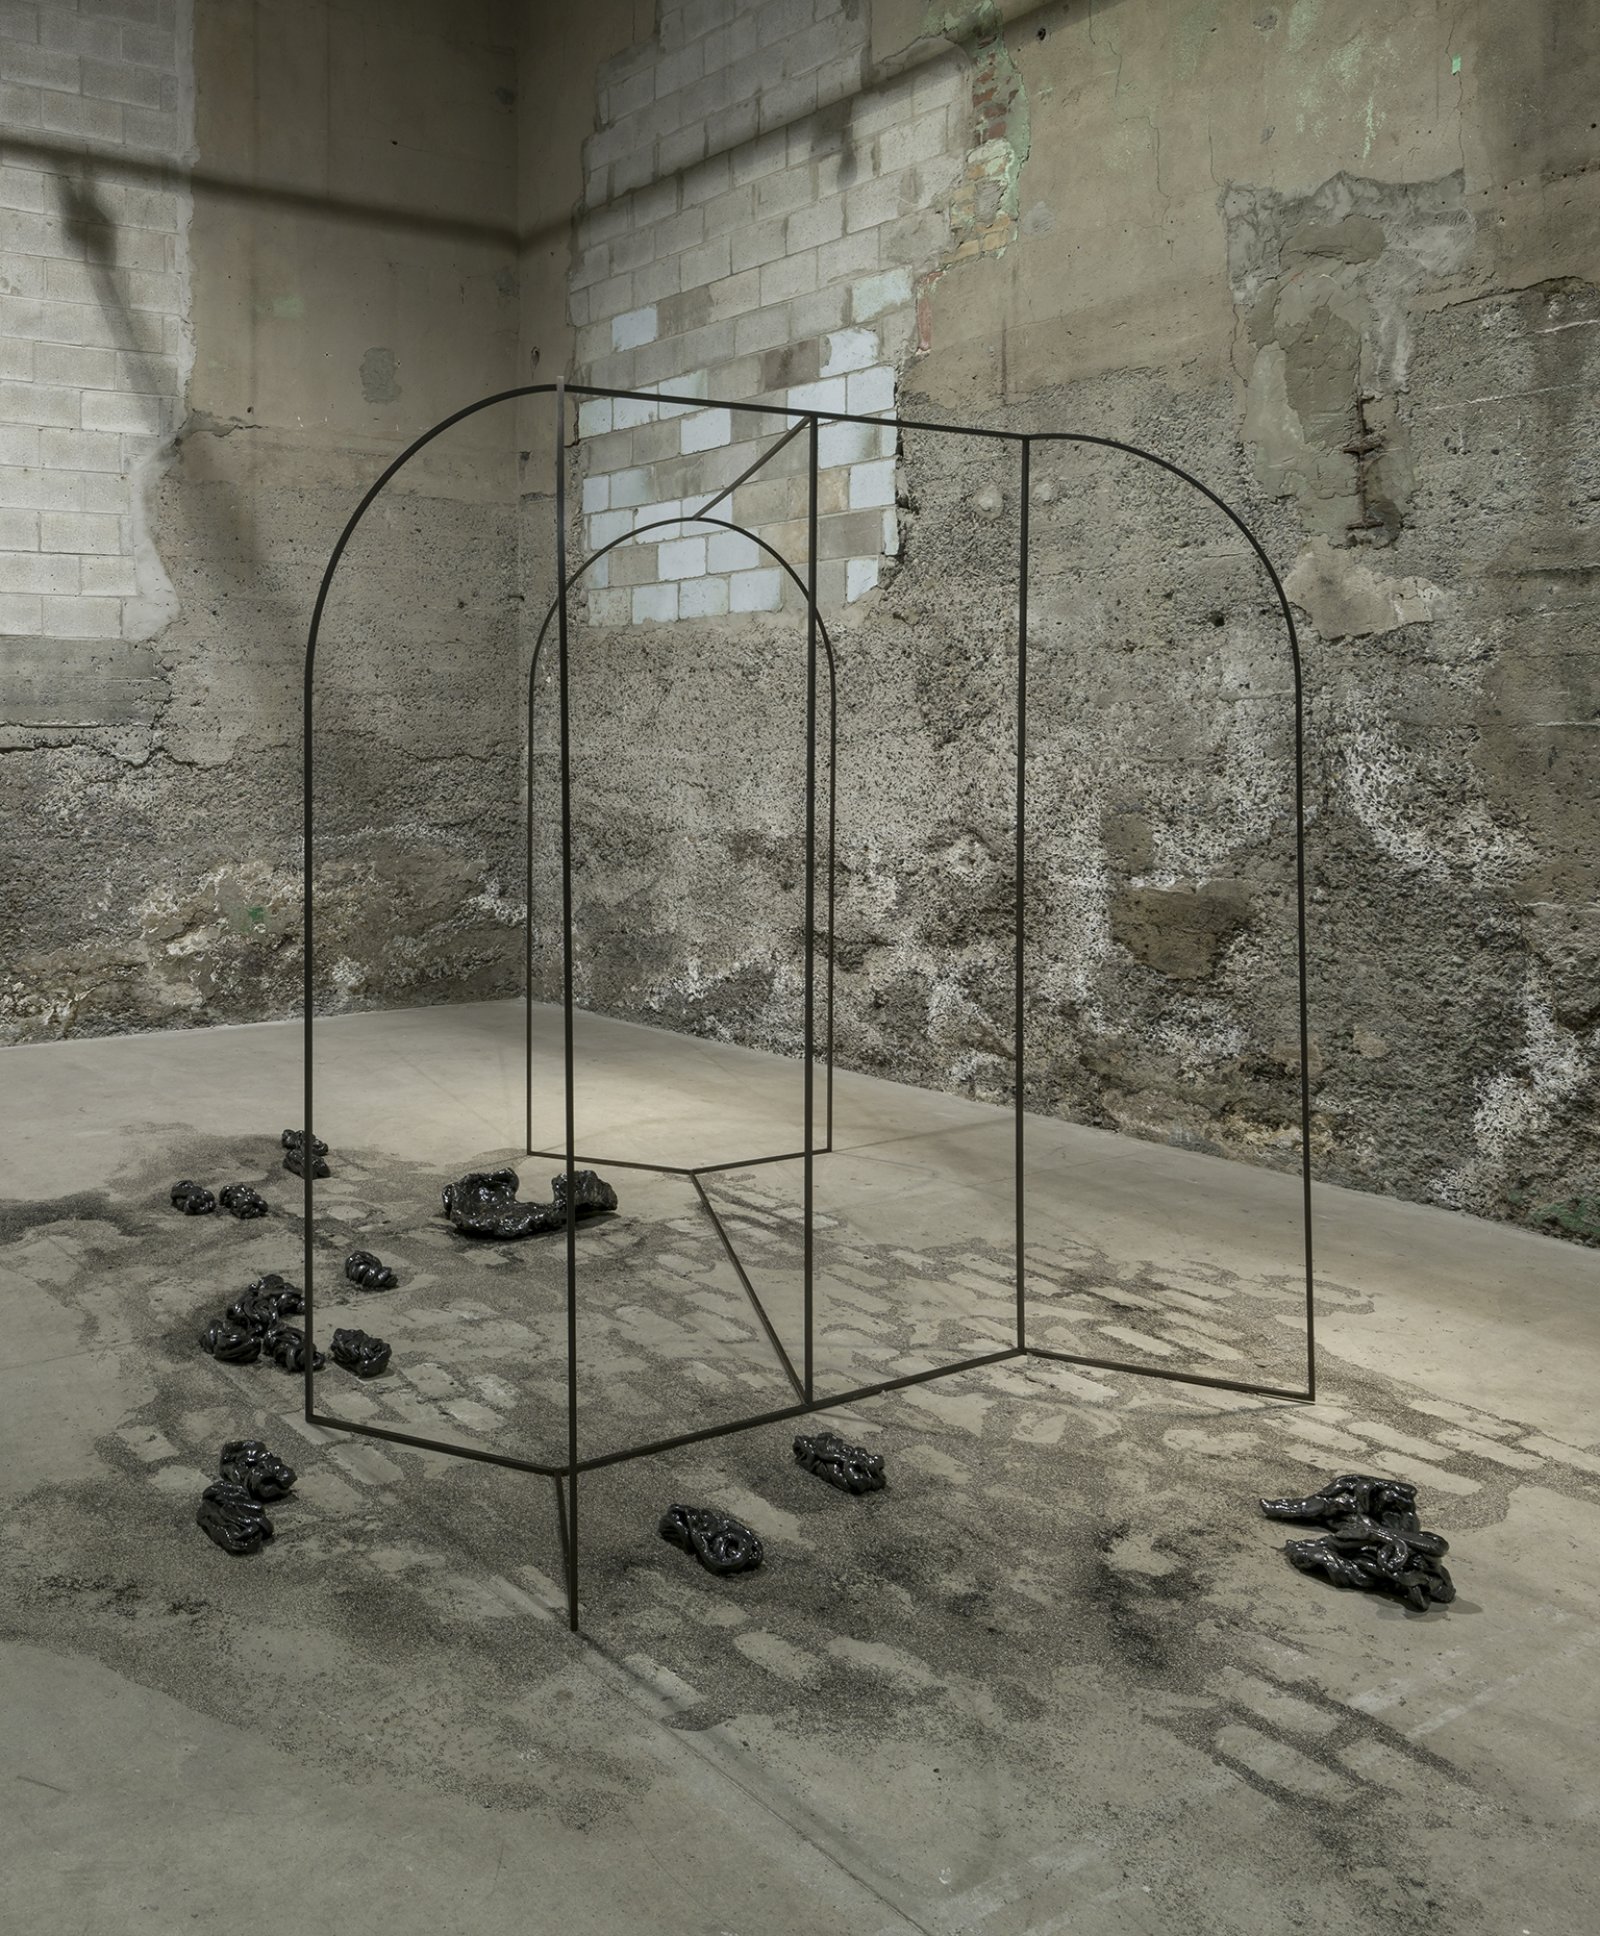 Rochelle Goldberg, The Mirror Isn’t Finished, 2016, steel, ceramic, chia, coal slag, 84 x 84 x 84 in. (213 x 213 x 213 cm). Installation view, A Worm Filled Body, Parisian Laundry, Montreal, Canada, 2016